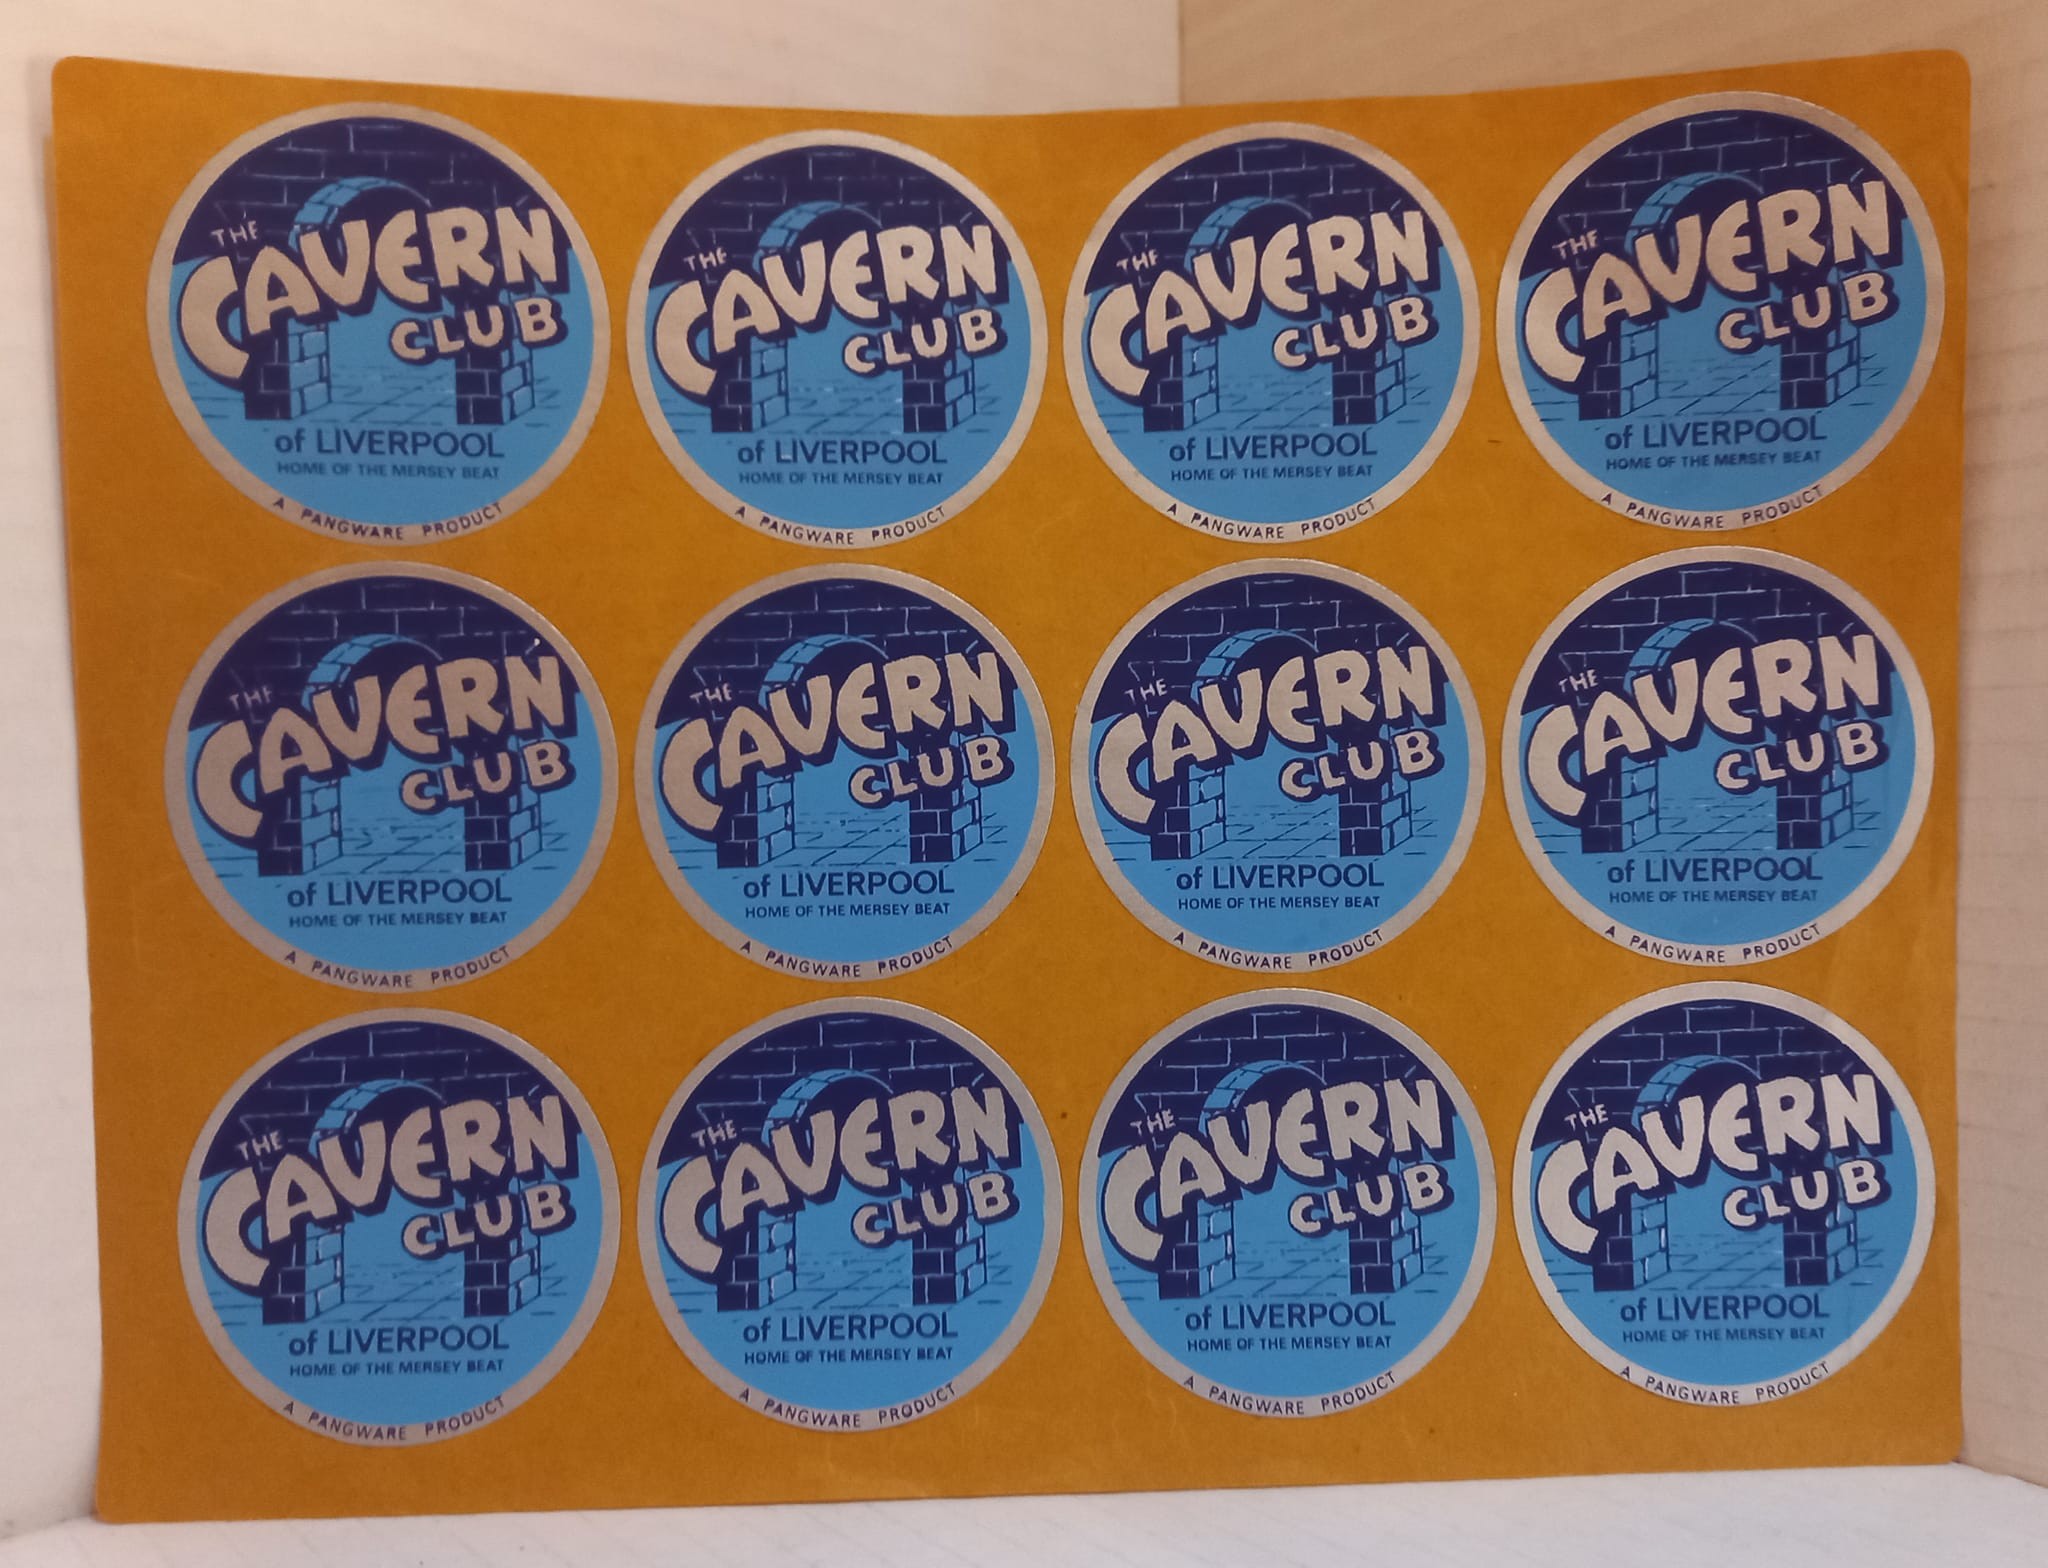 Complete Sheet of Original Cavern Club circular stickers made by Pangware UK 1967